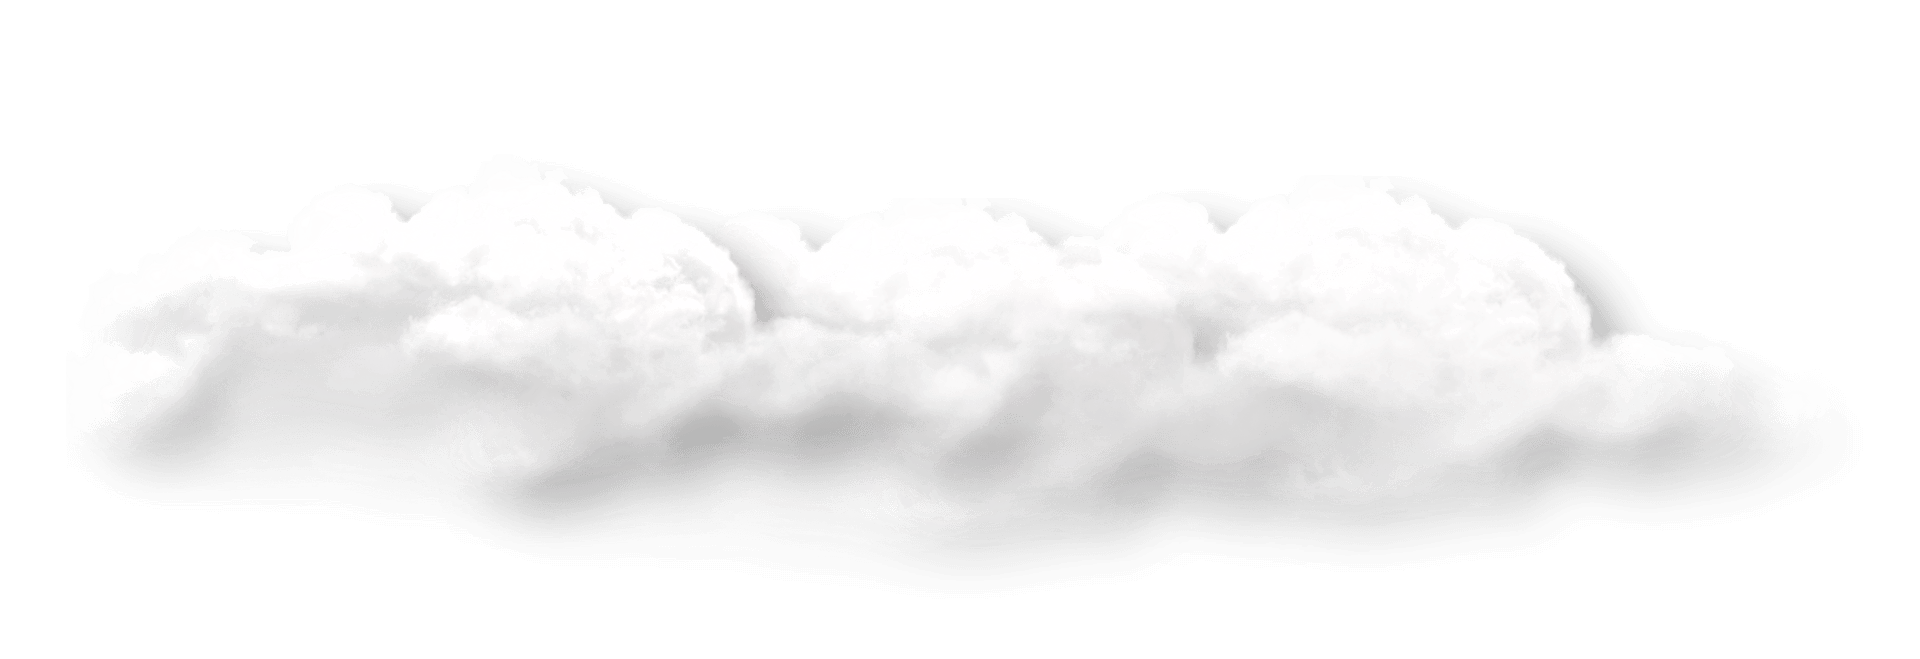 A fluffy, voluminous white cloud isolated on a black background.